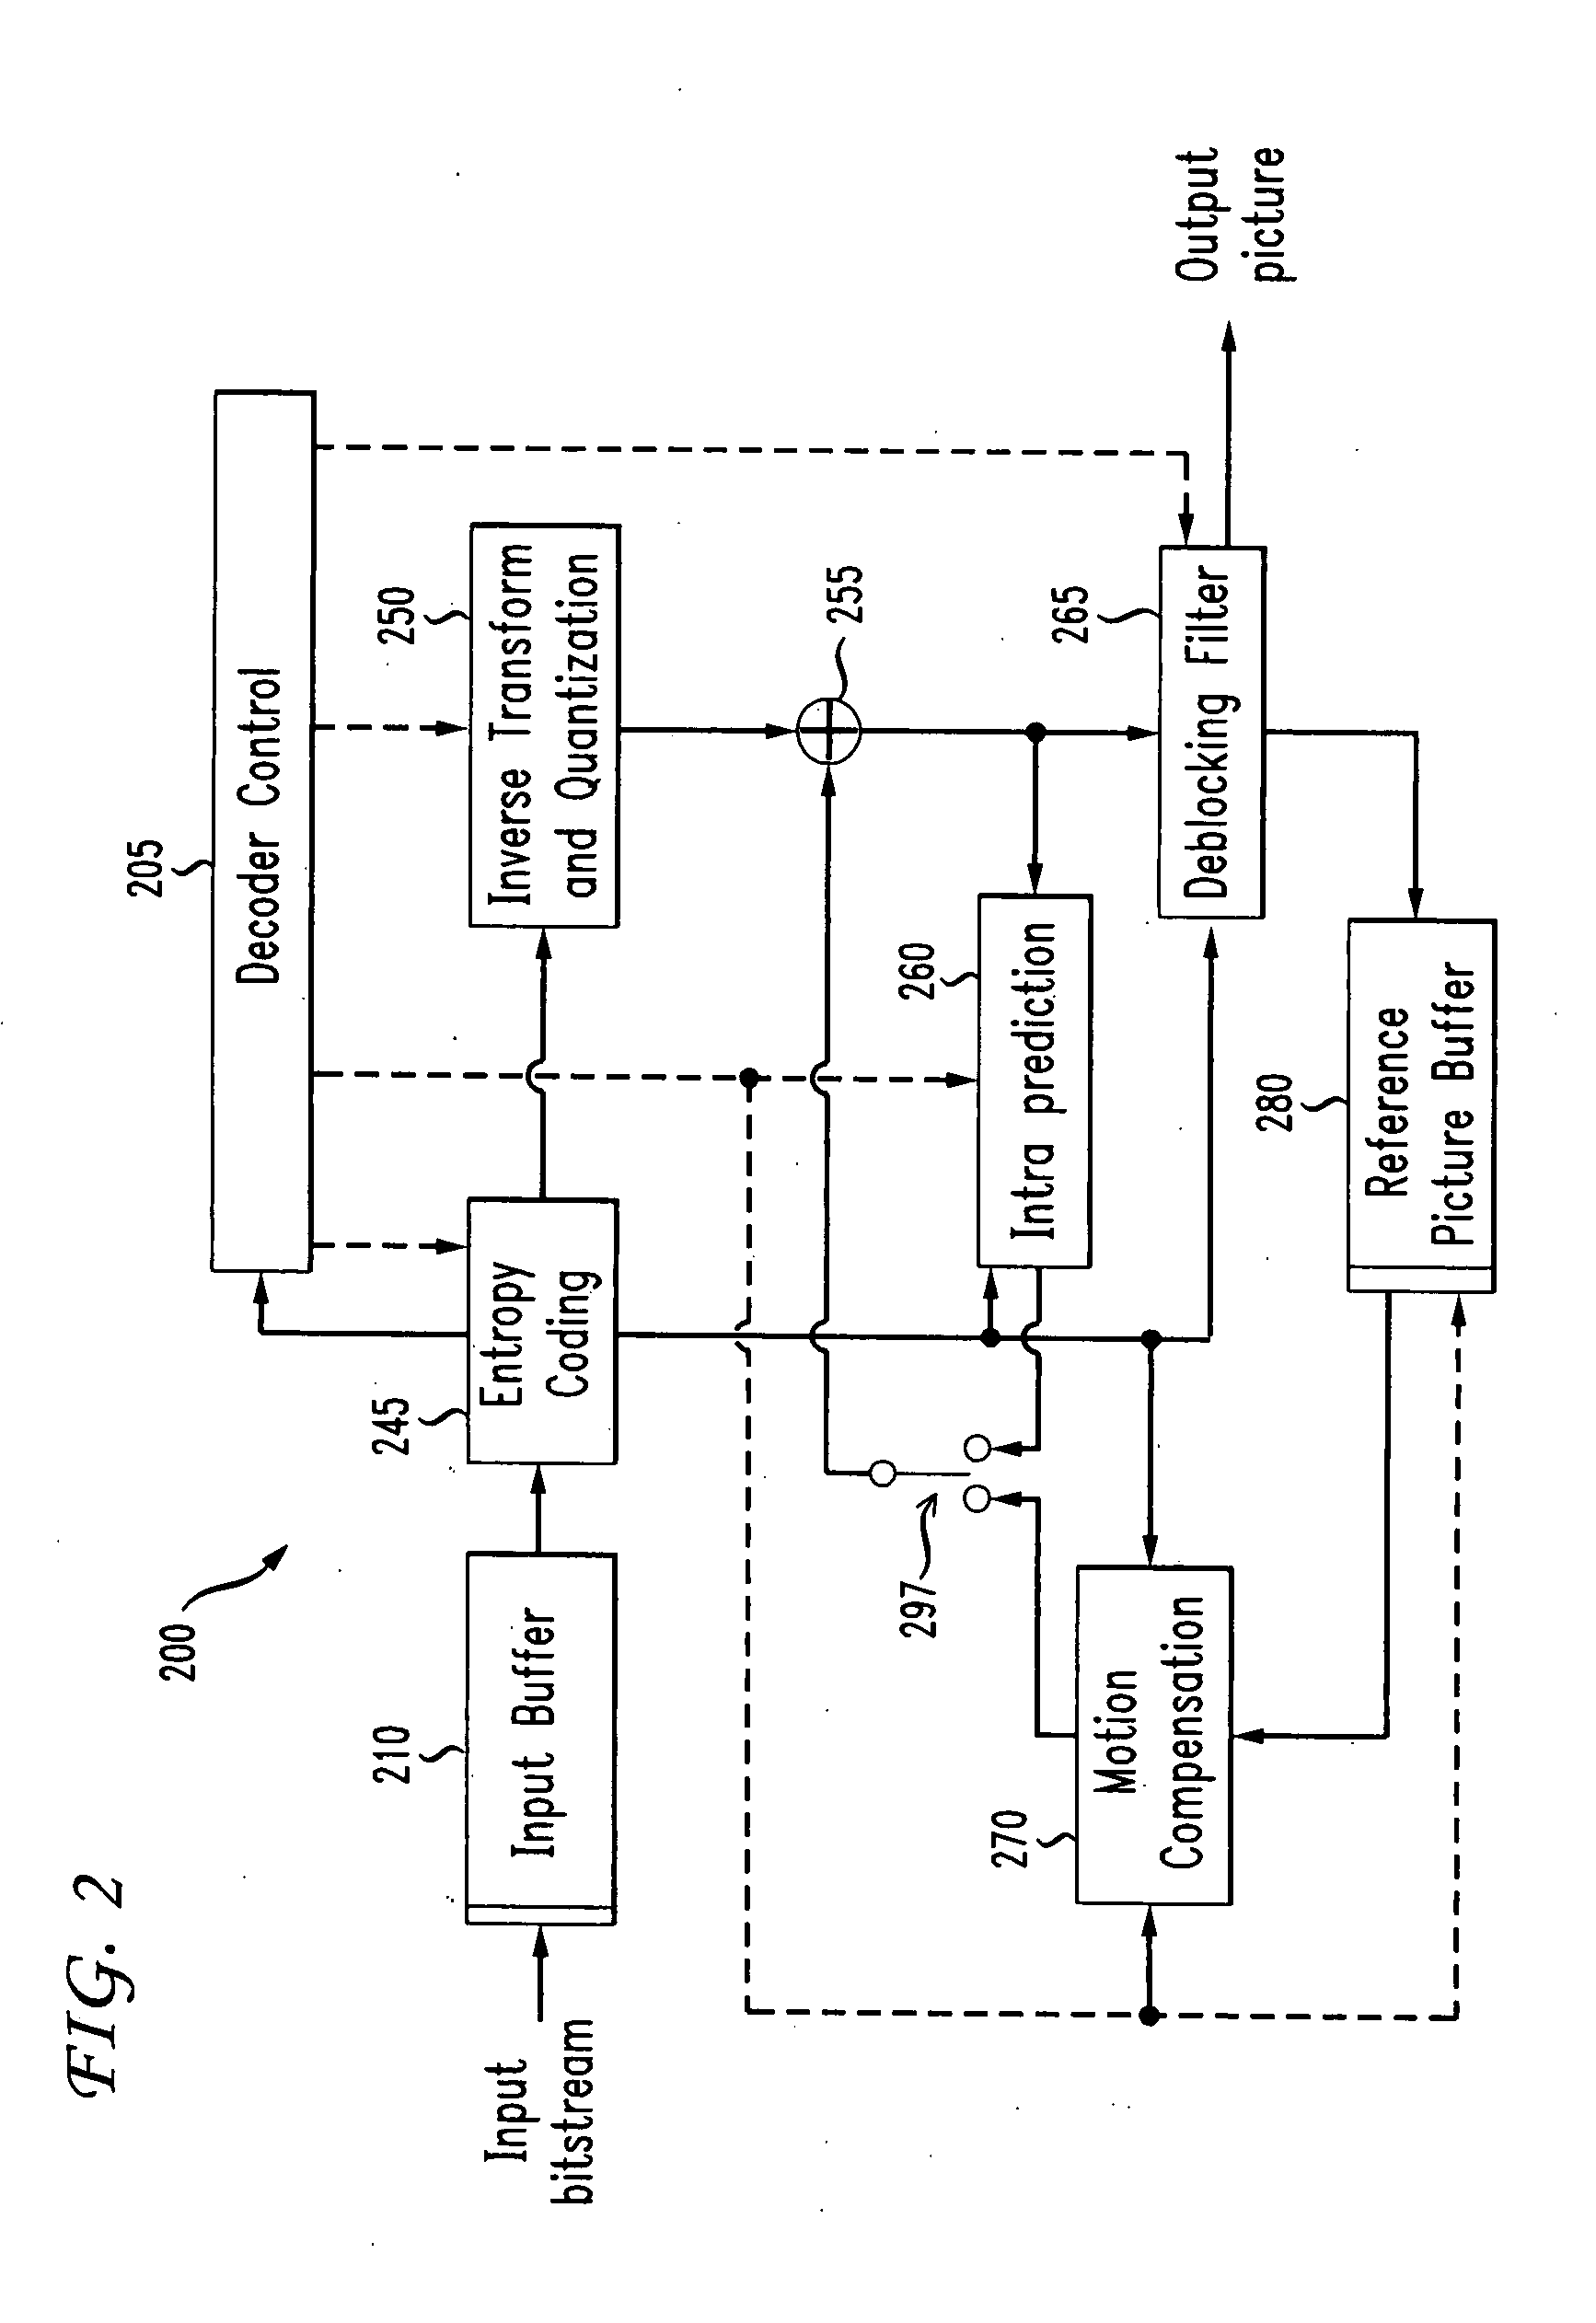 Methods and apparatus for bit depth scalable video encoding and decoding utilizing tone mapping and inverse tone mapping